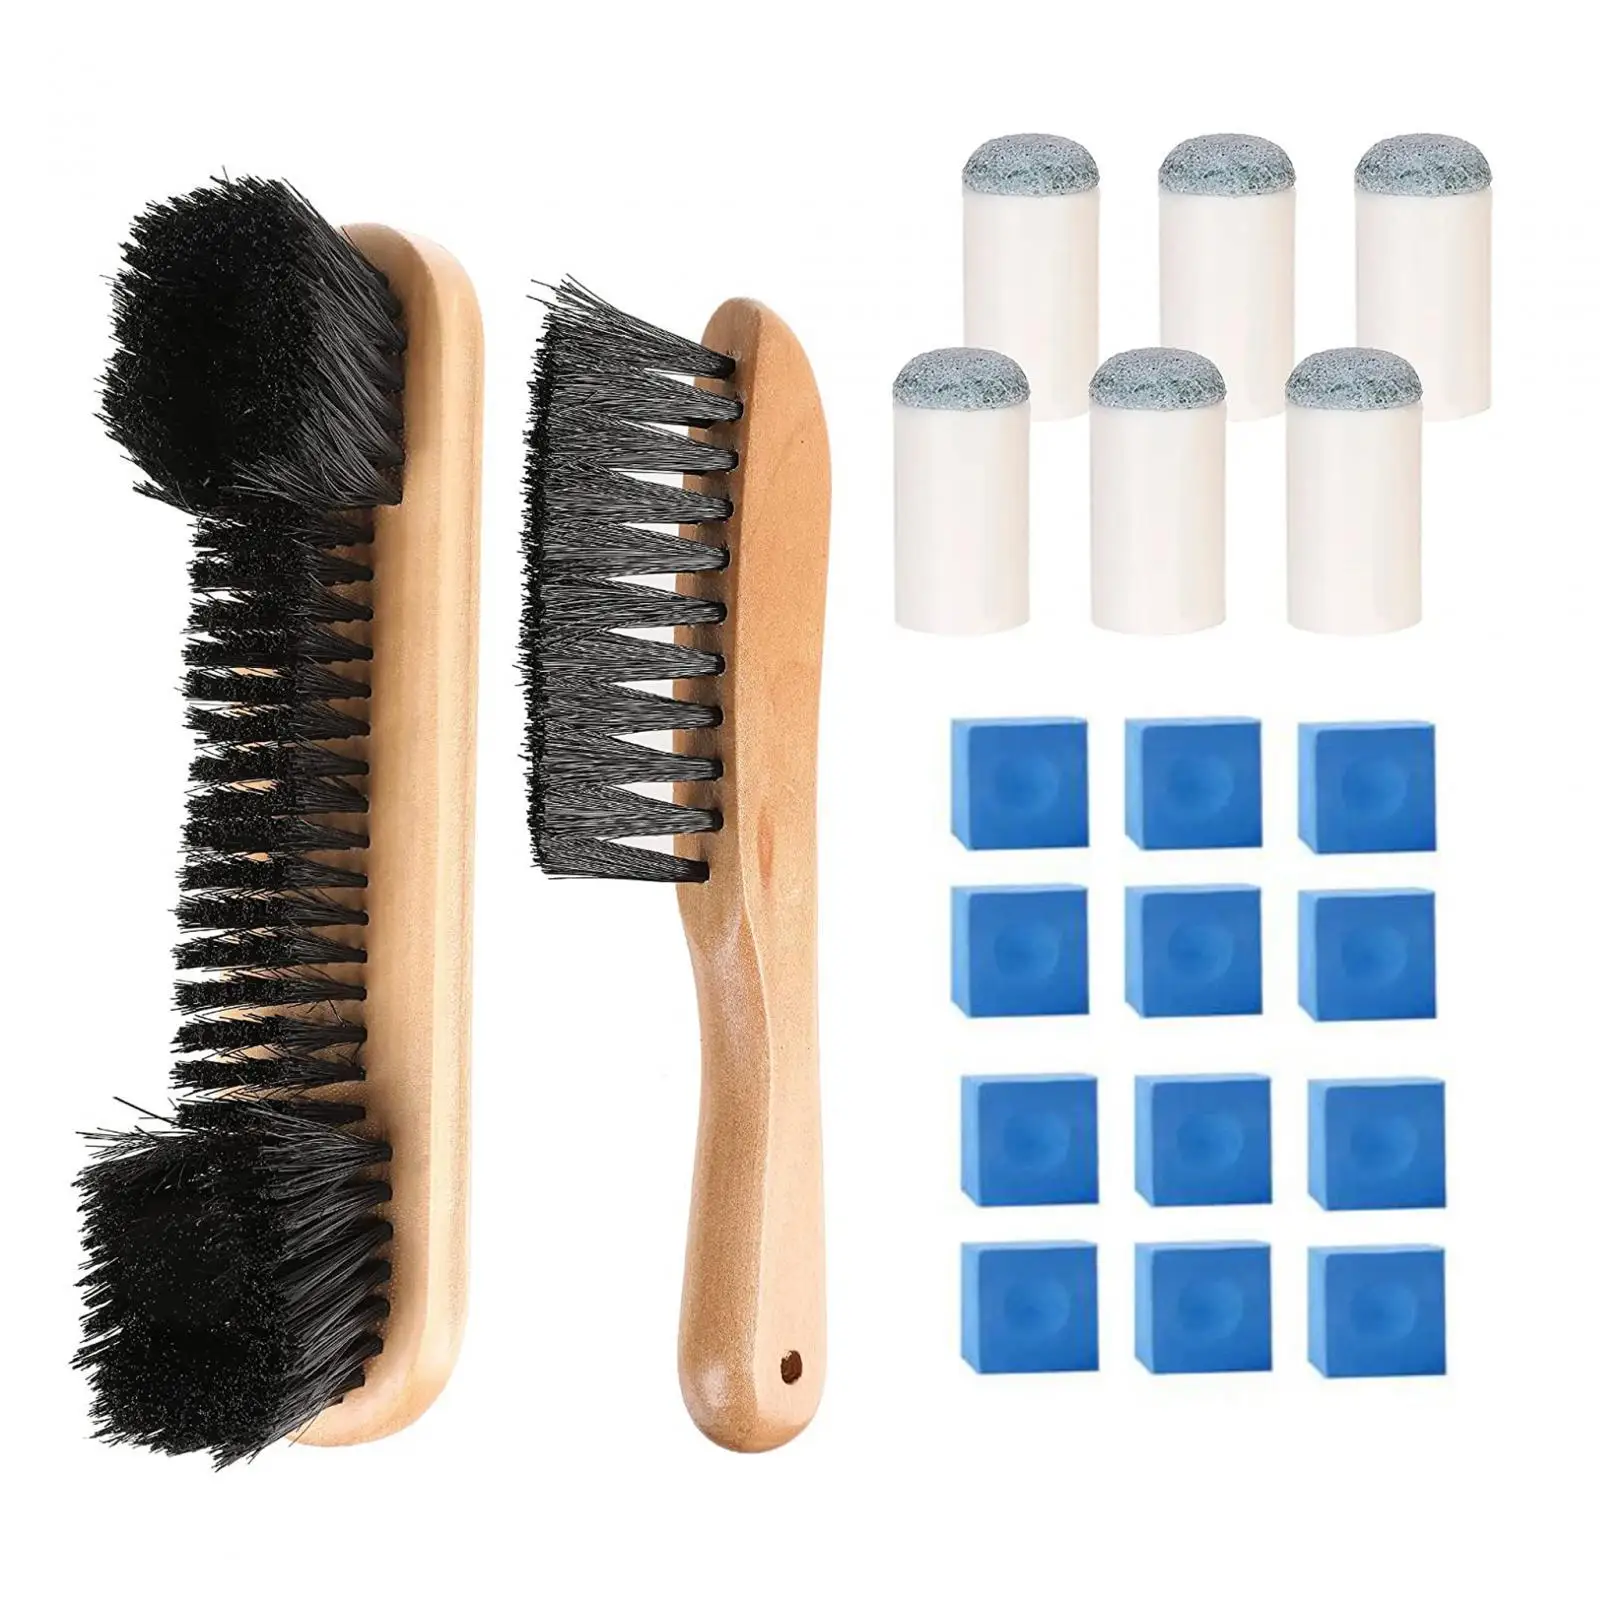 Billiard Pool Table Brush Brush Set Convenient Durable Cue Tips Replacements Pool Snooker Accessories Billiards Brush